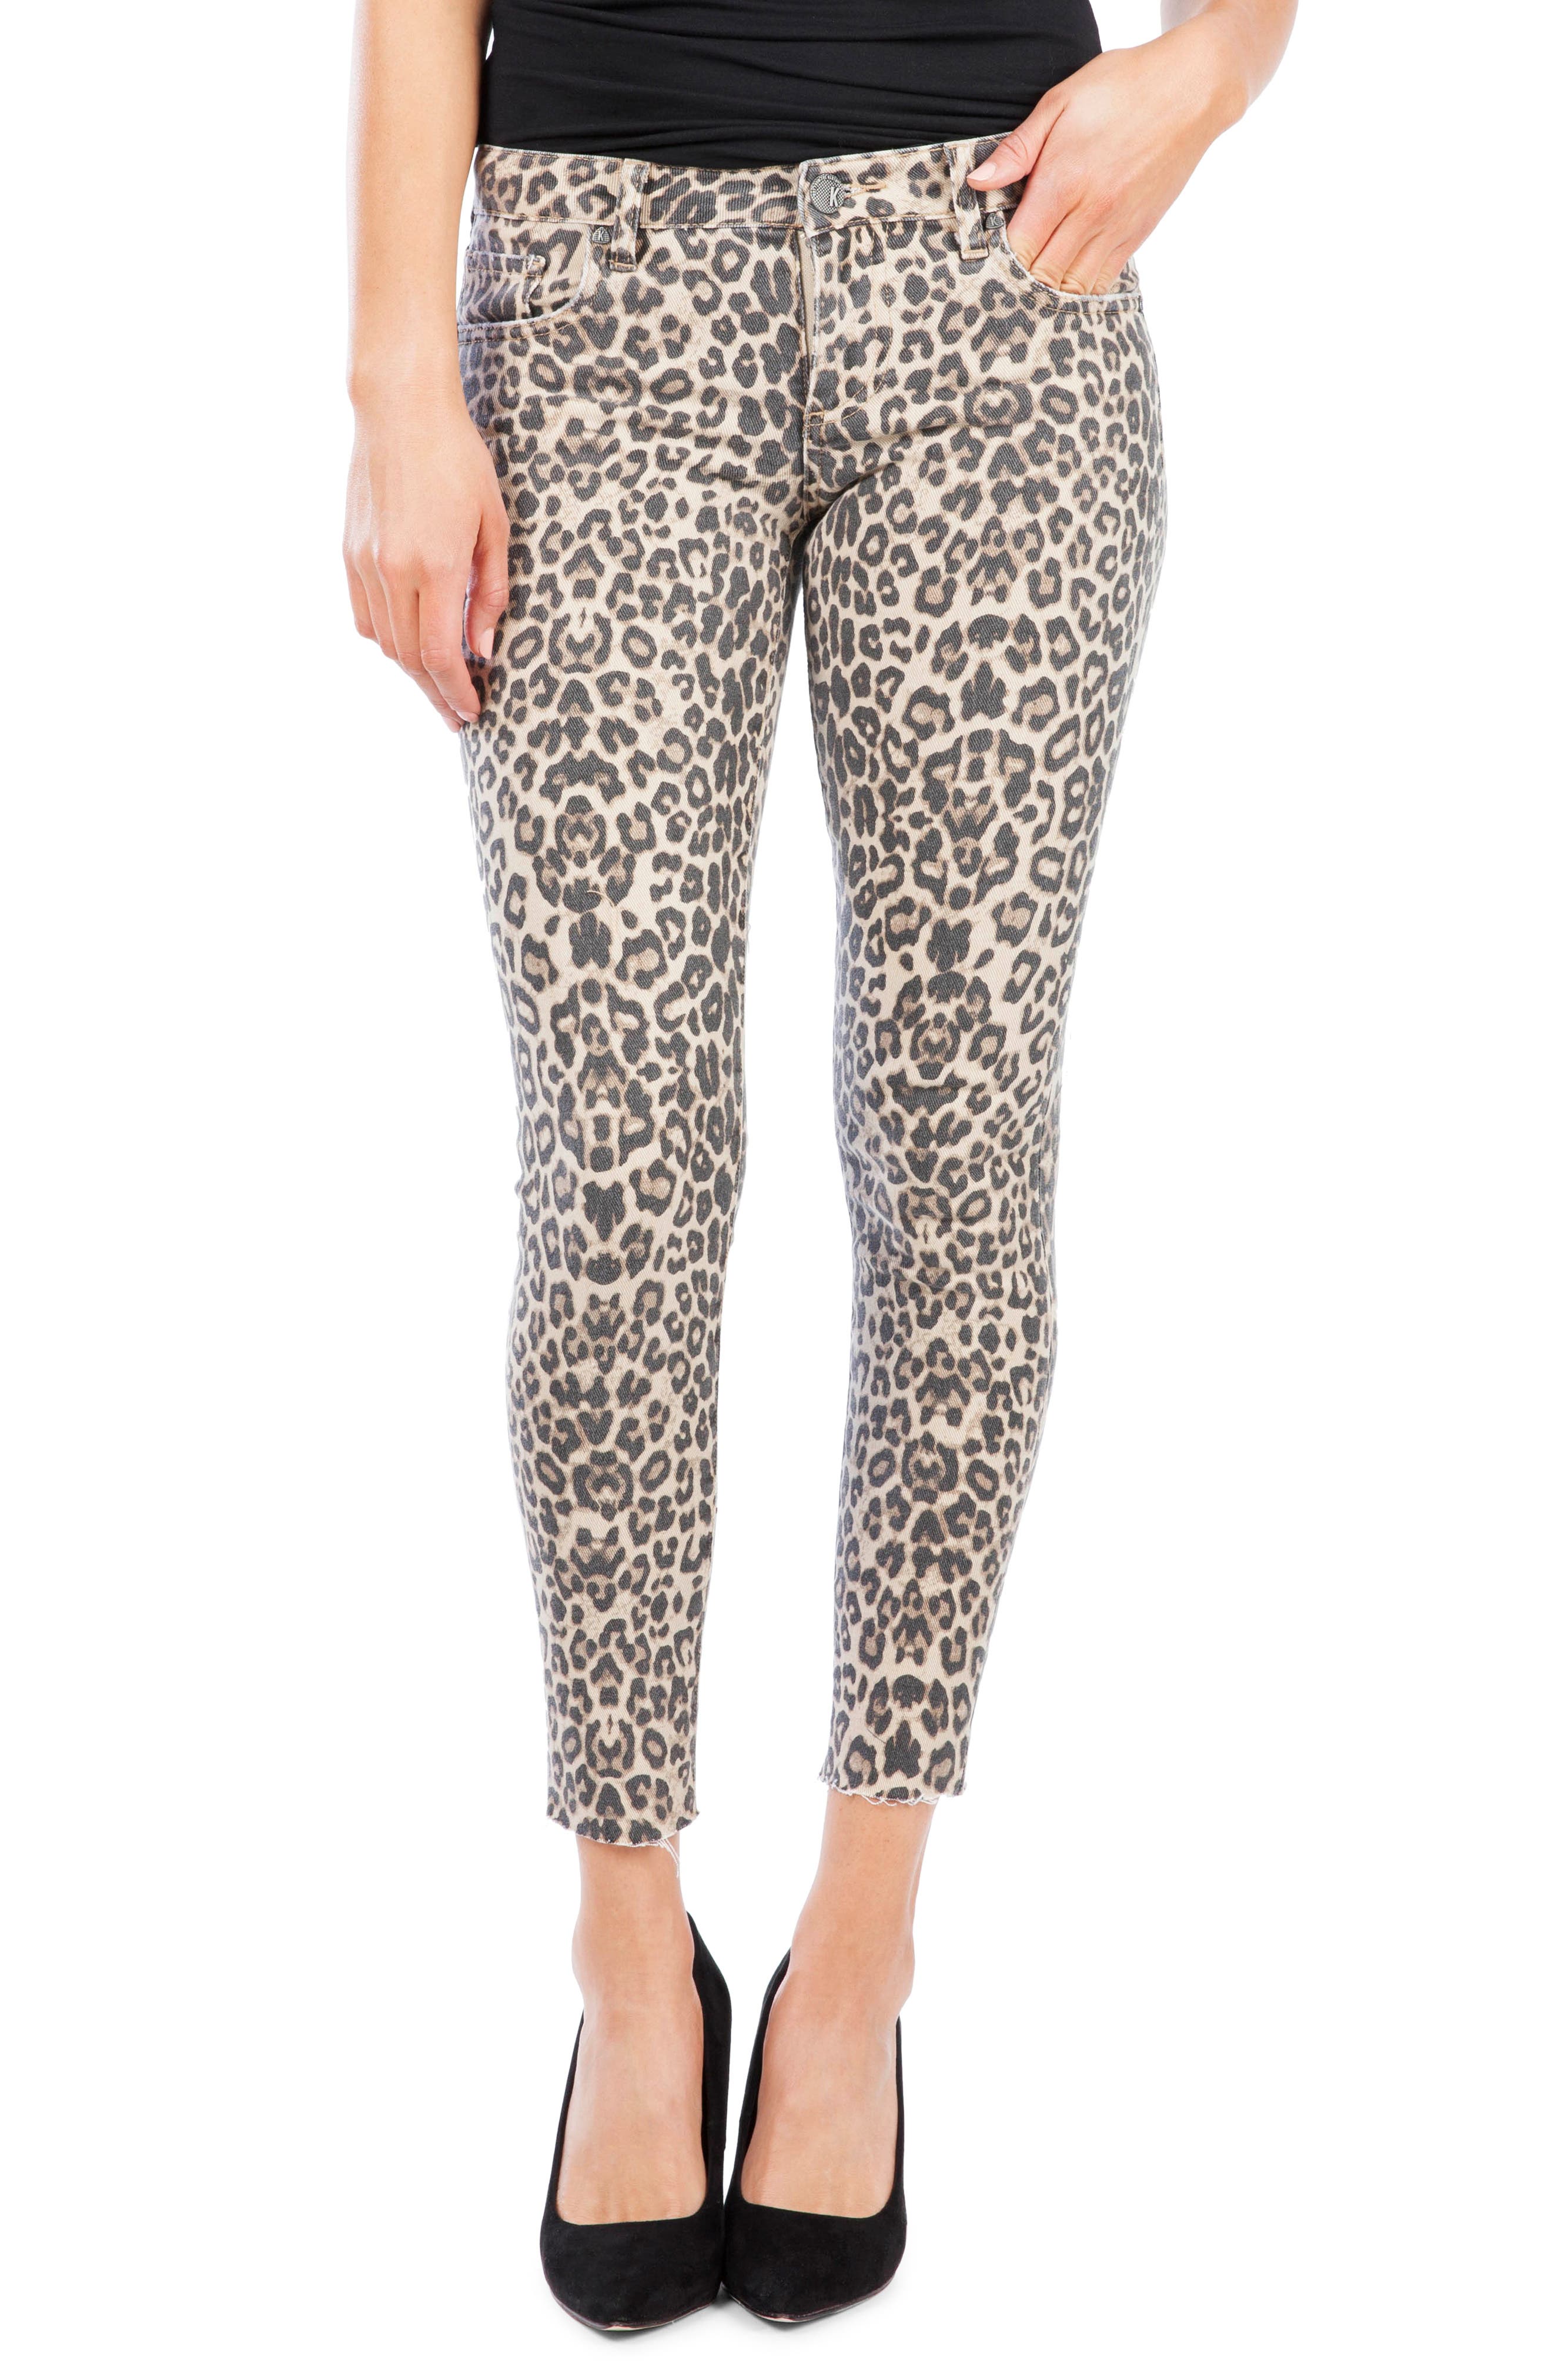 kut from the kloth leopard jeans